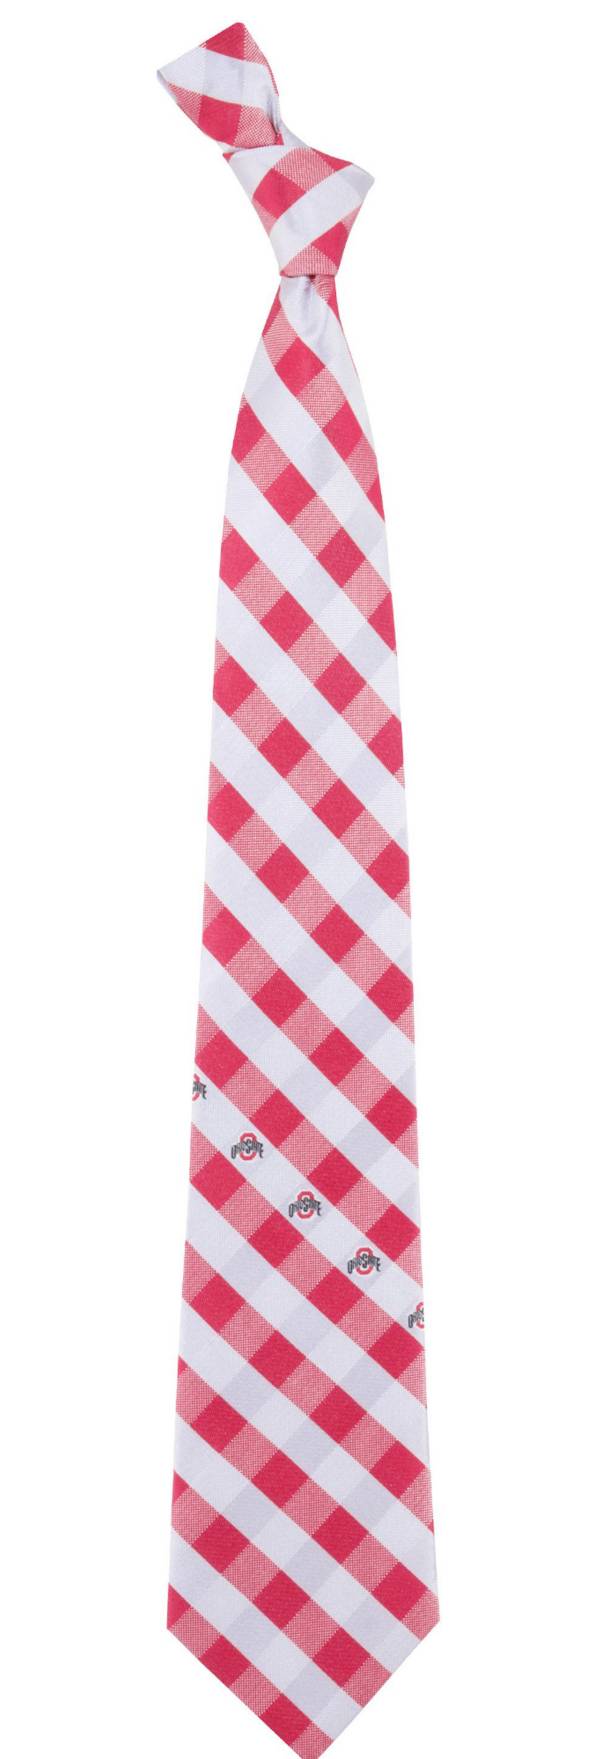 Eagles Wings Ohio State Buckeyes Check Necktie product image